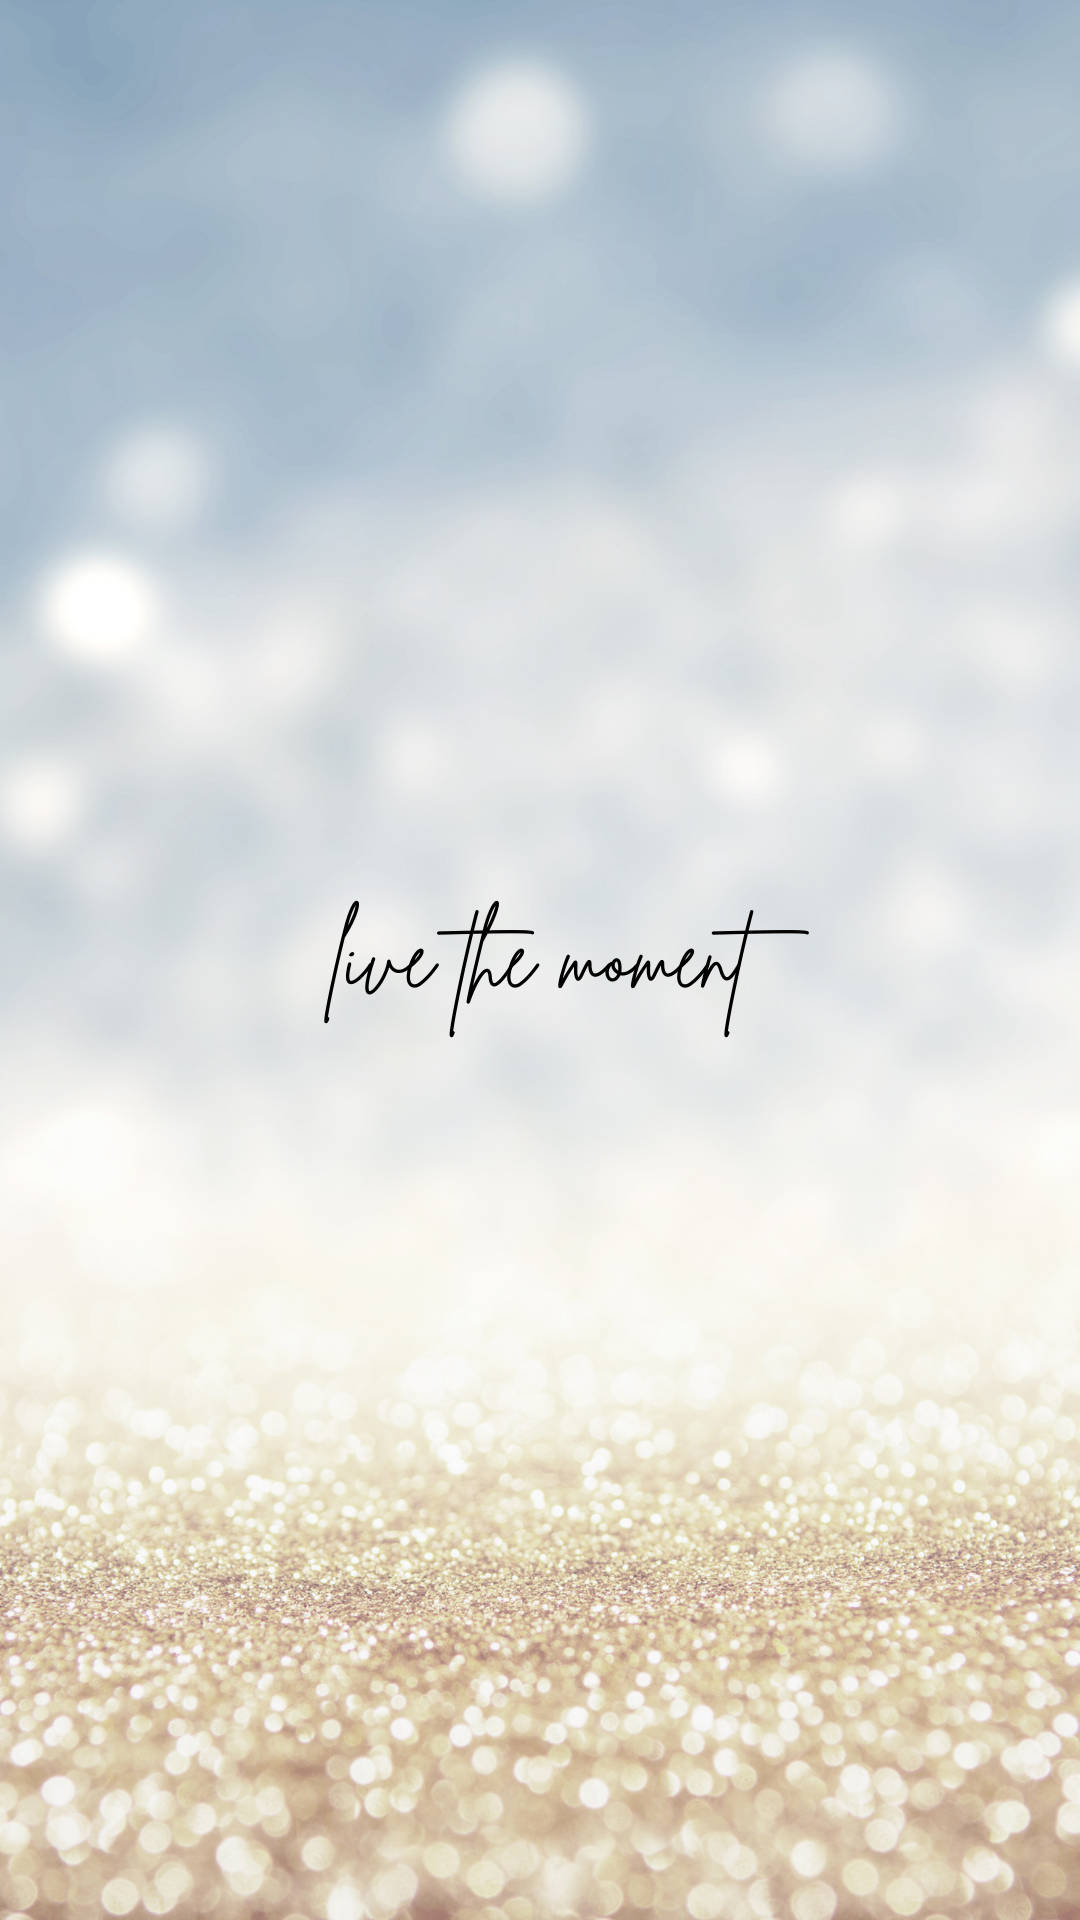 live in the moment wallpaper